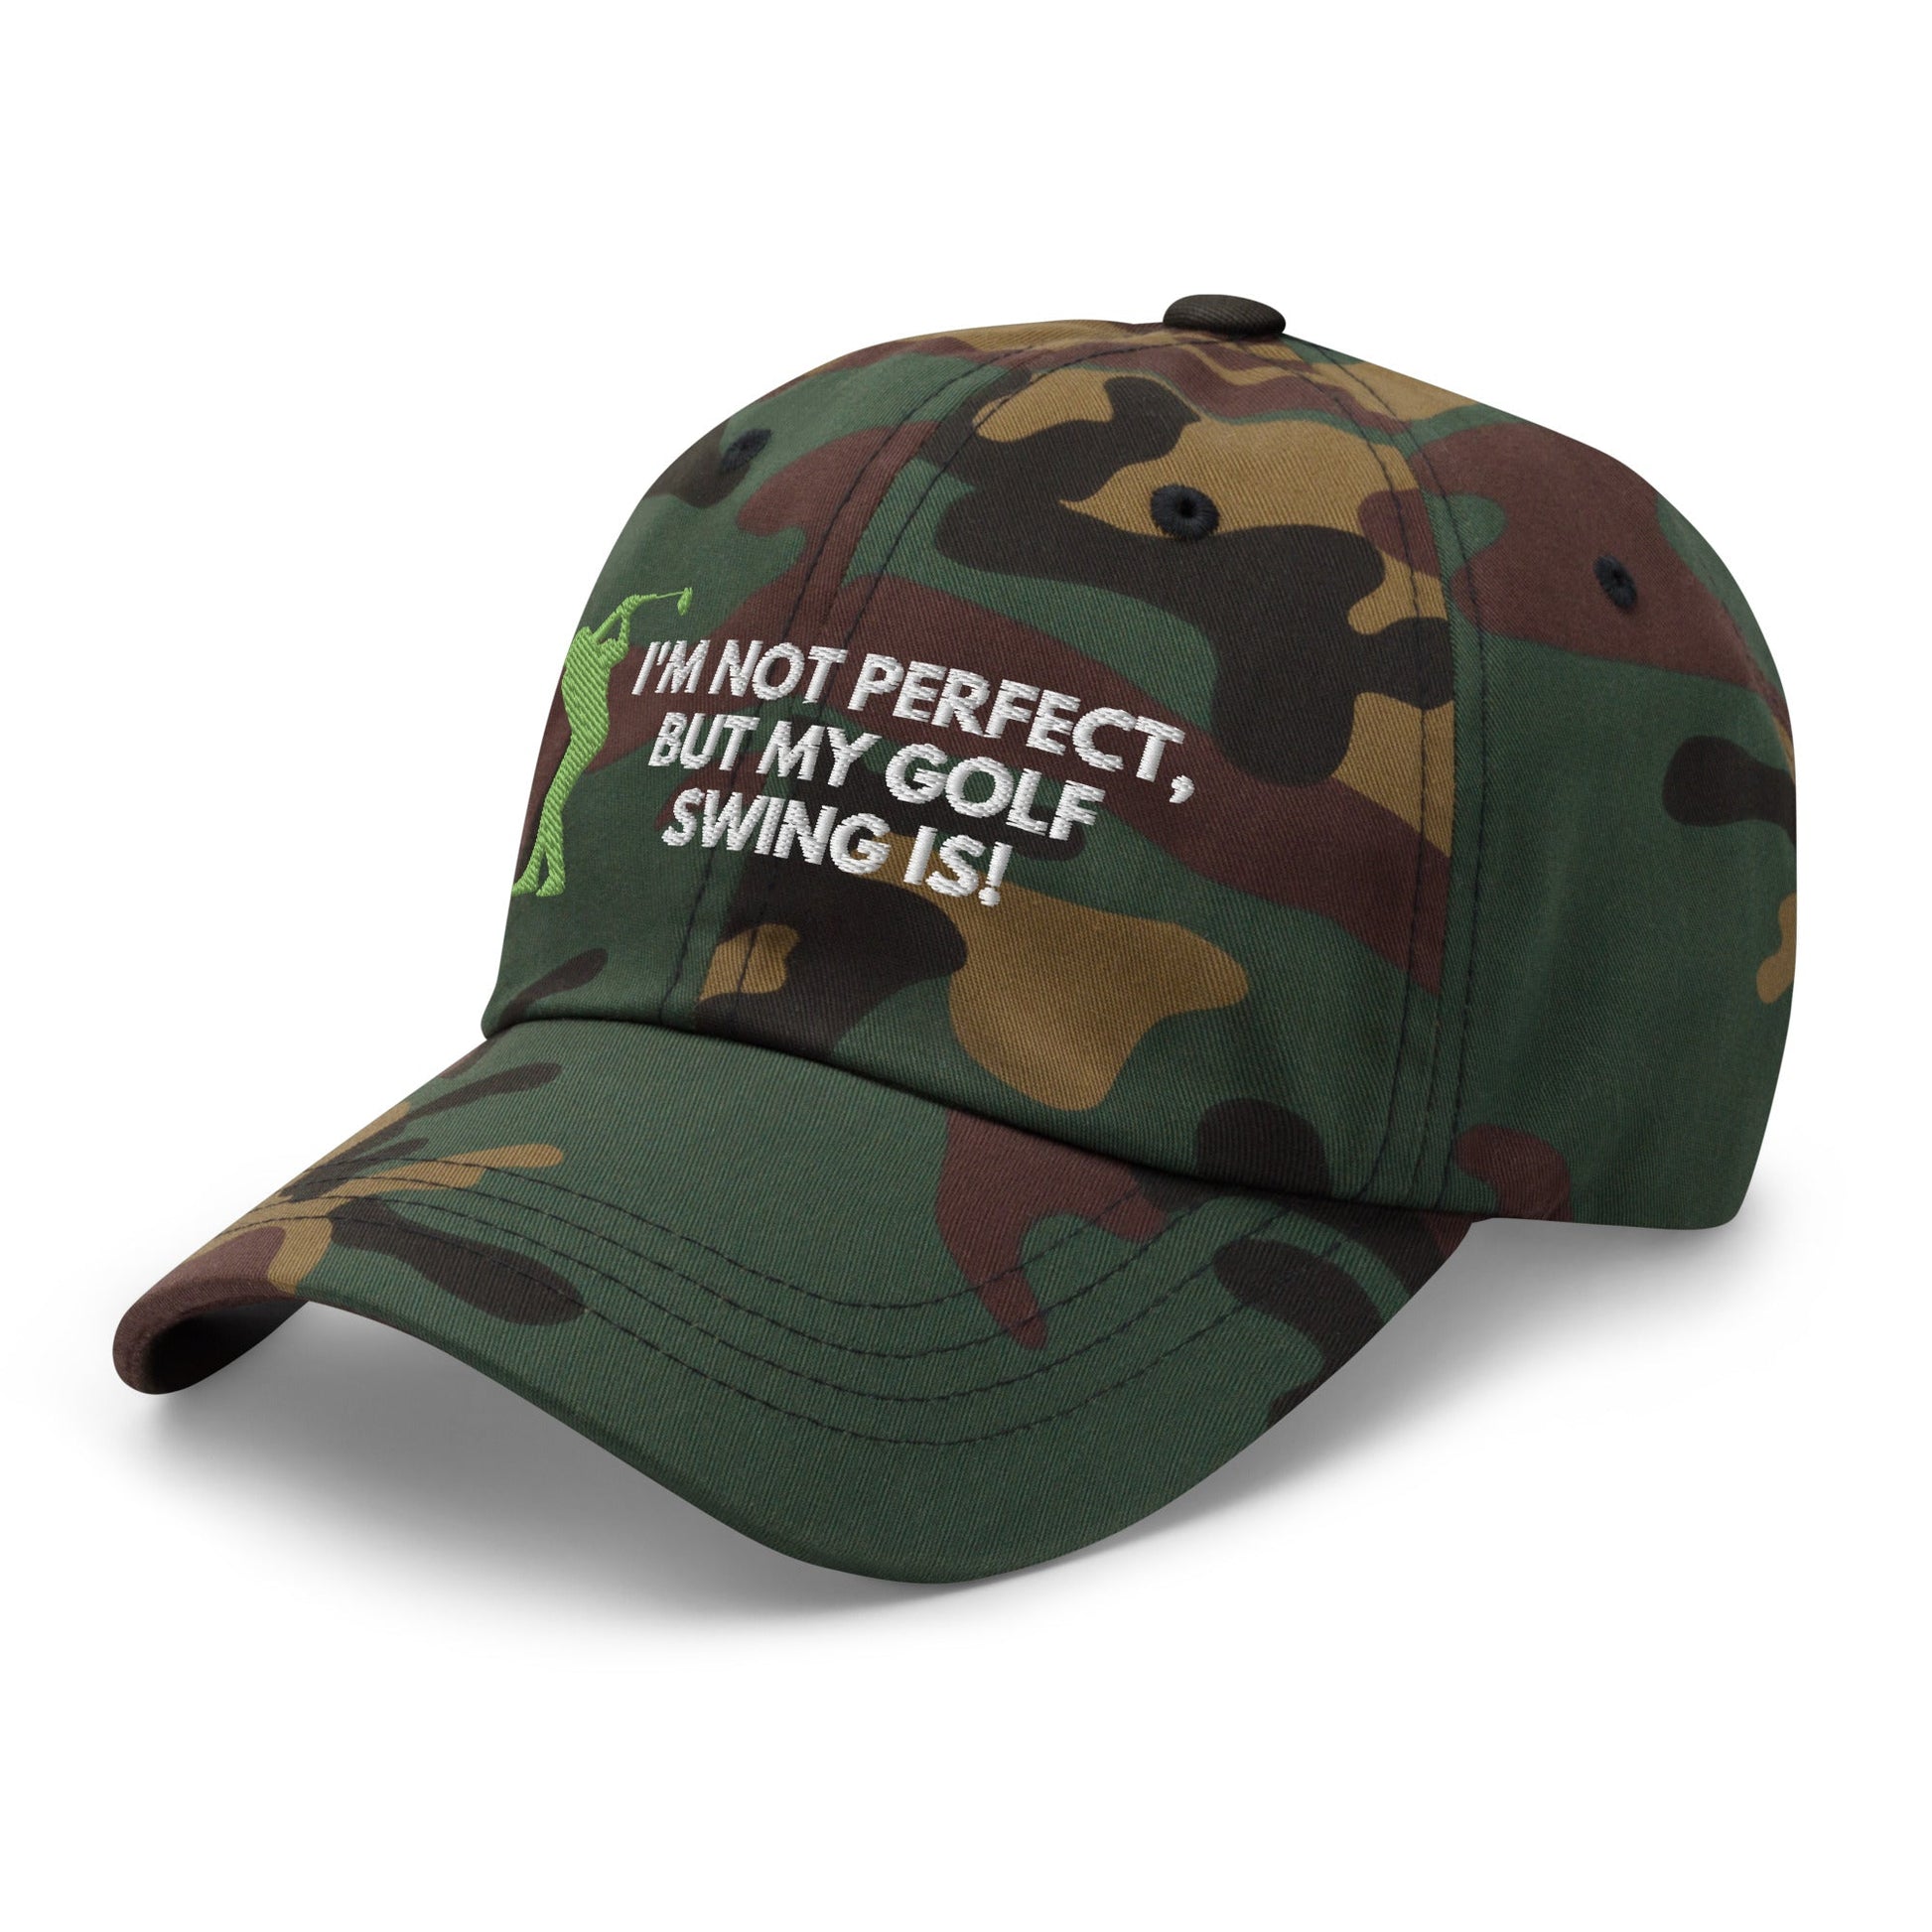 Funny Golfer Gifts  Dad Cap I'm Not Perfect But My Golf Swing Is Hat Cap